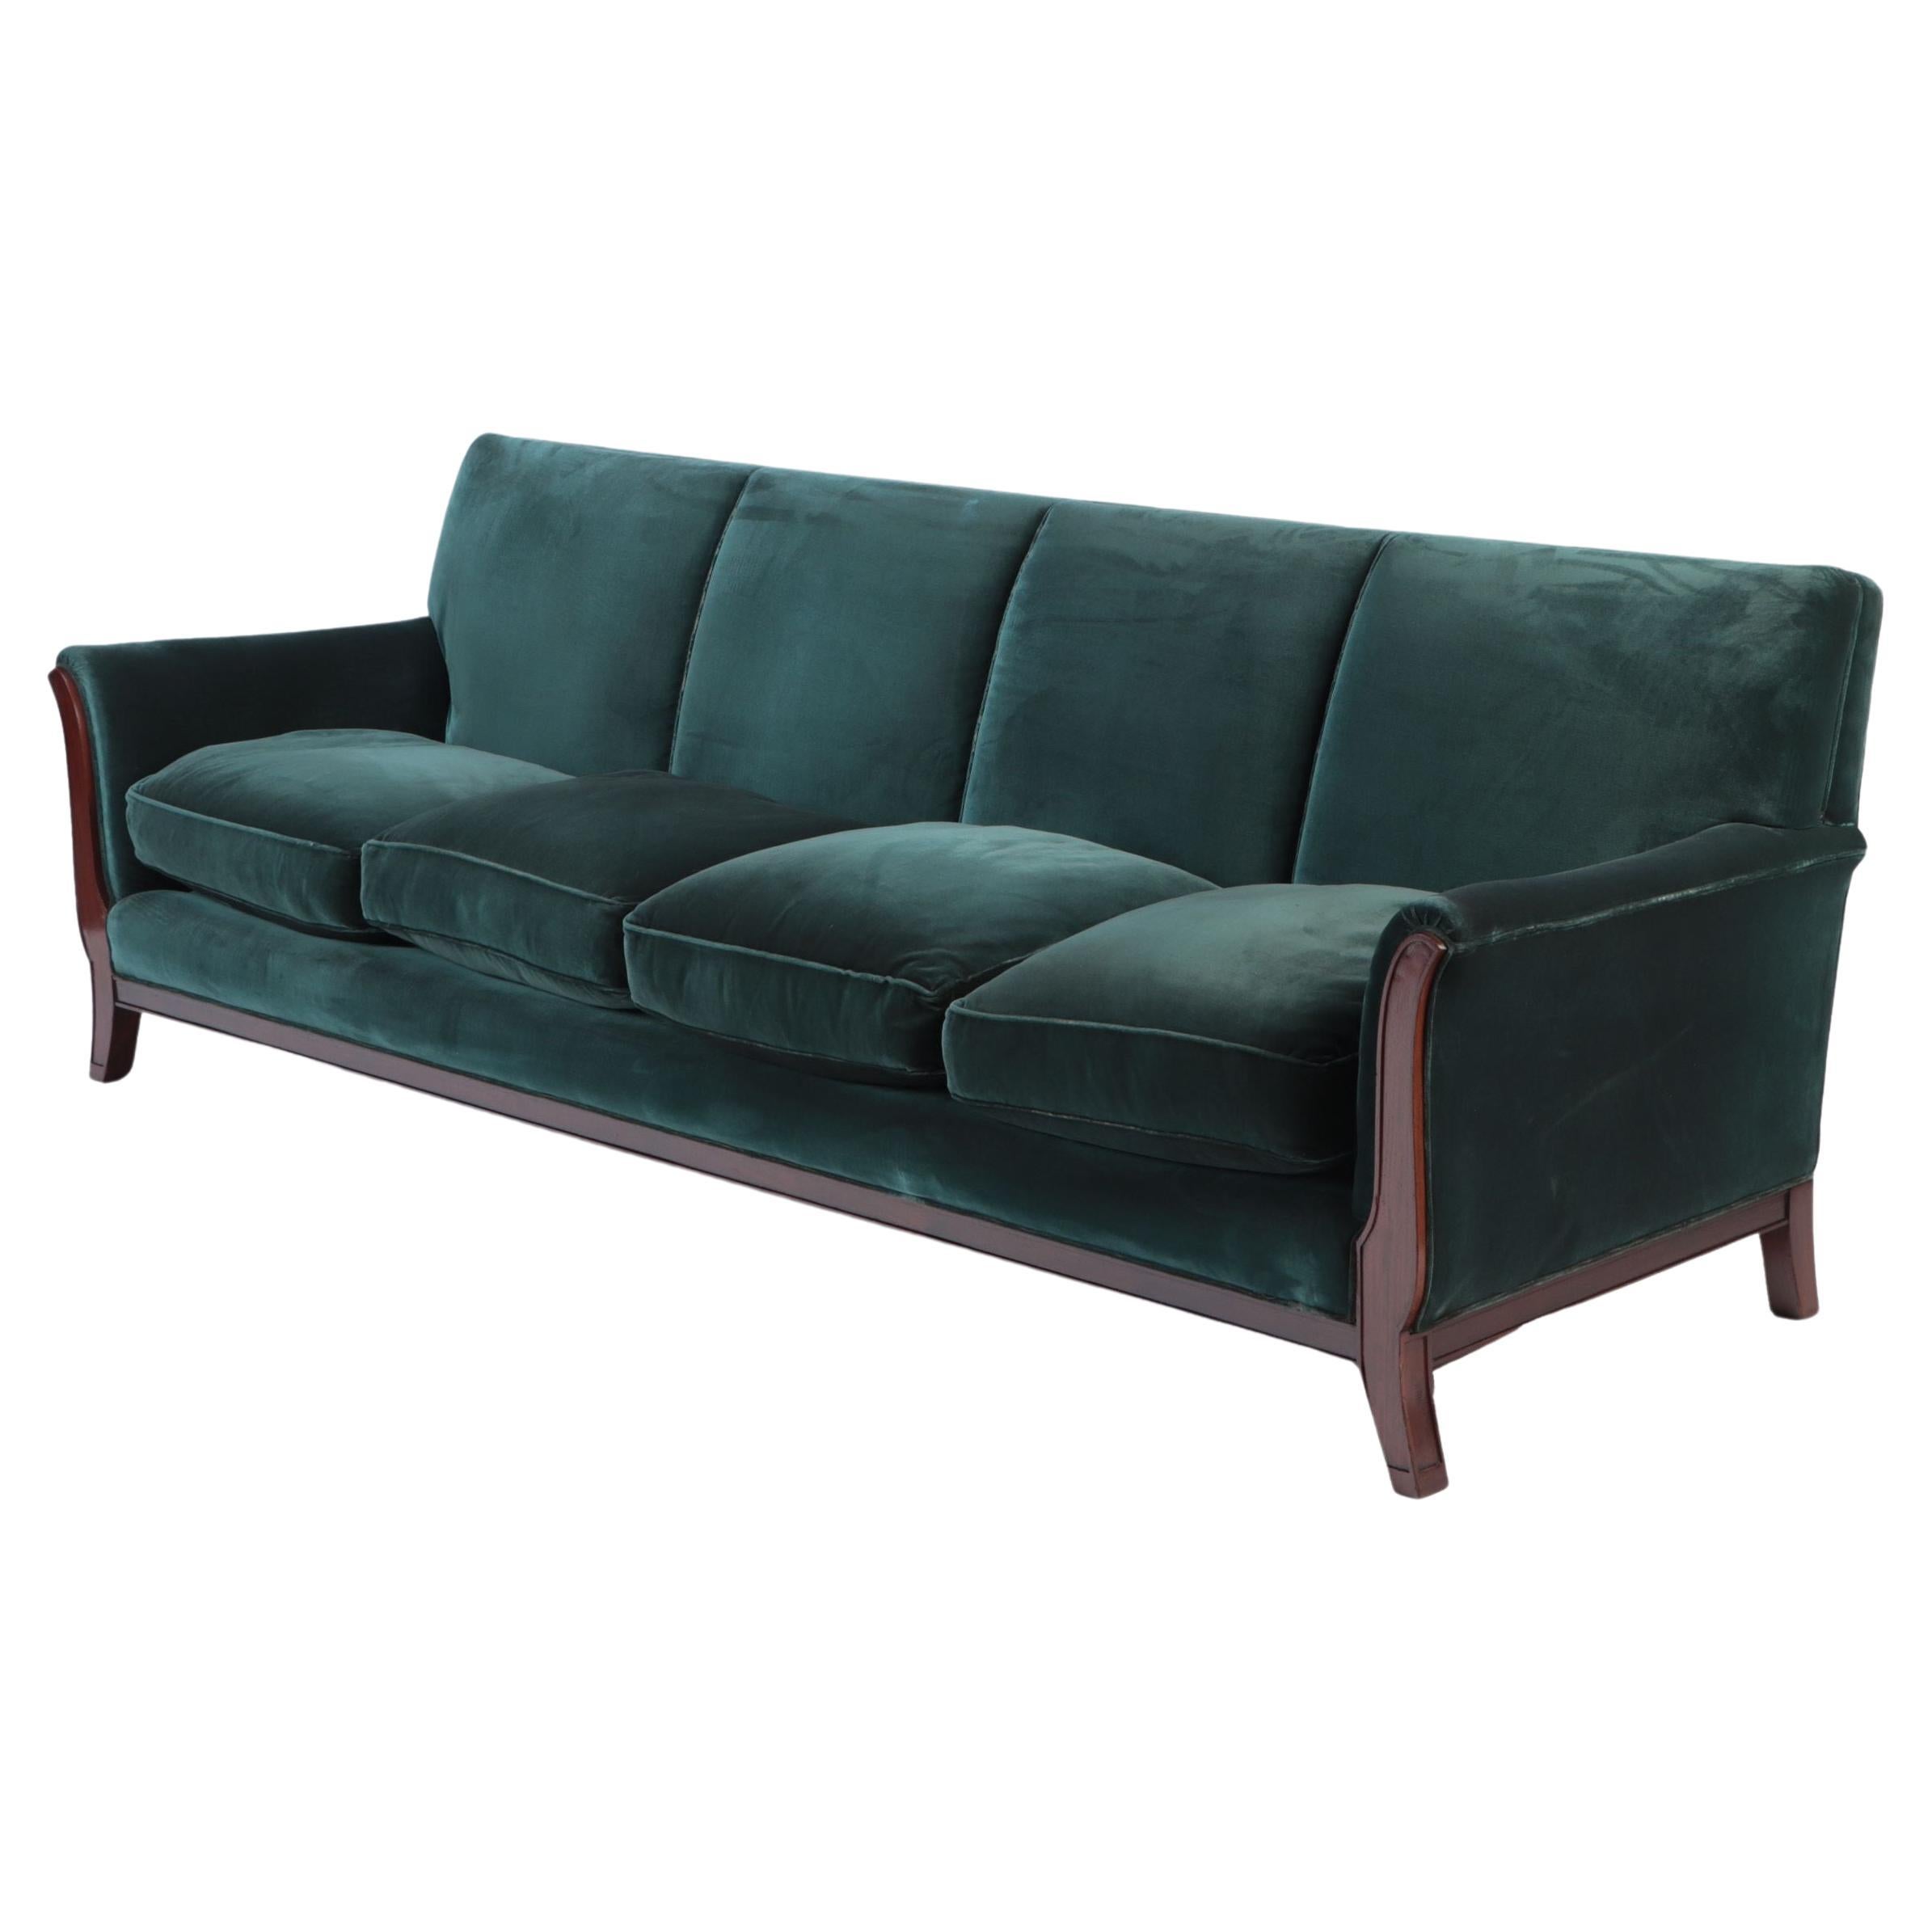 Mid Century Modern French Large Sofa with Green Velvet Upholstery, circa 1945 For Sale